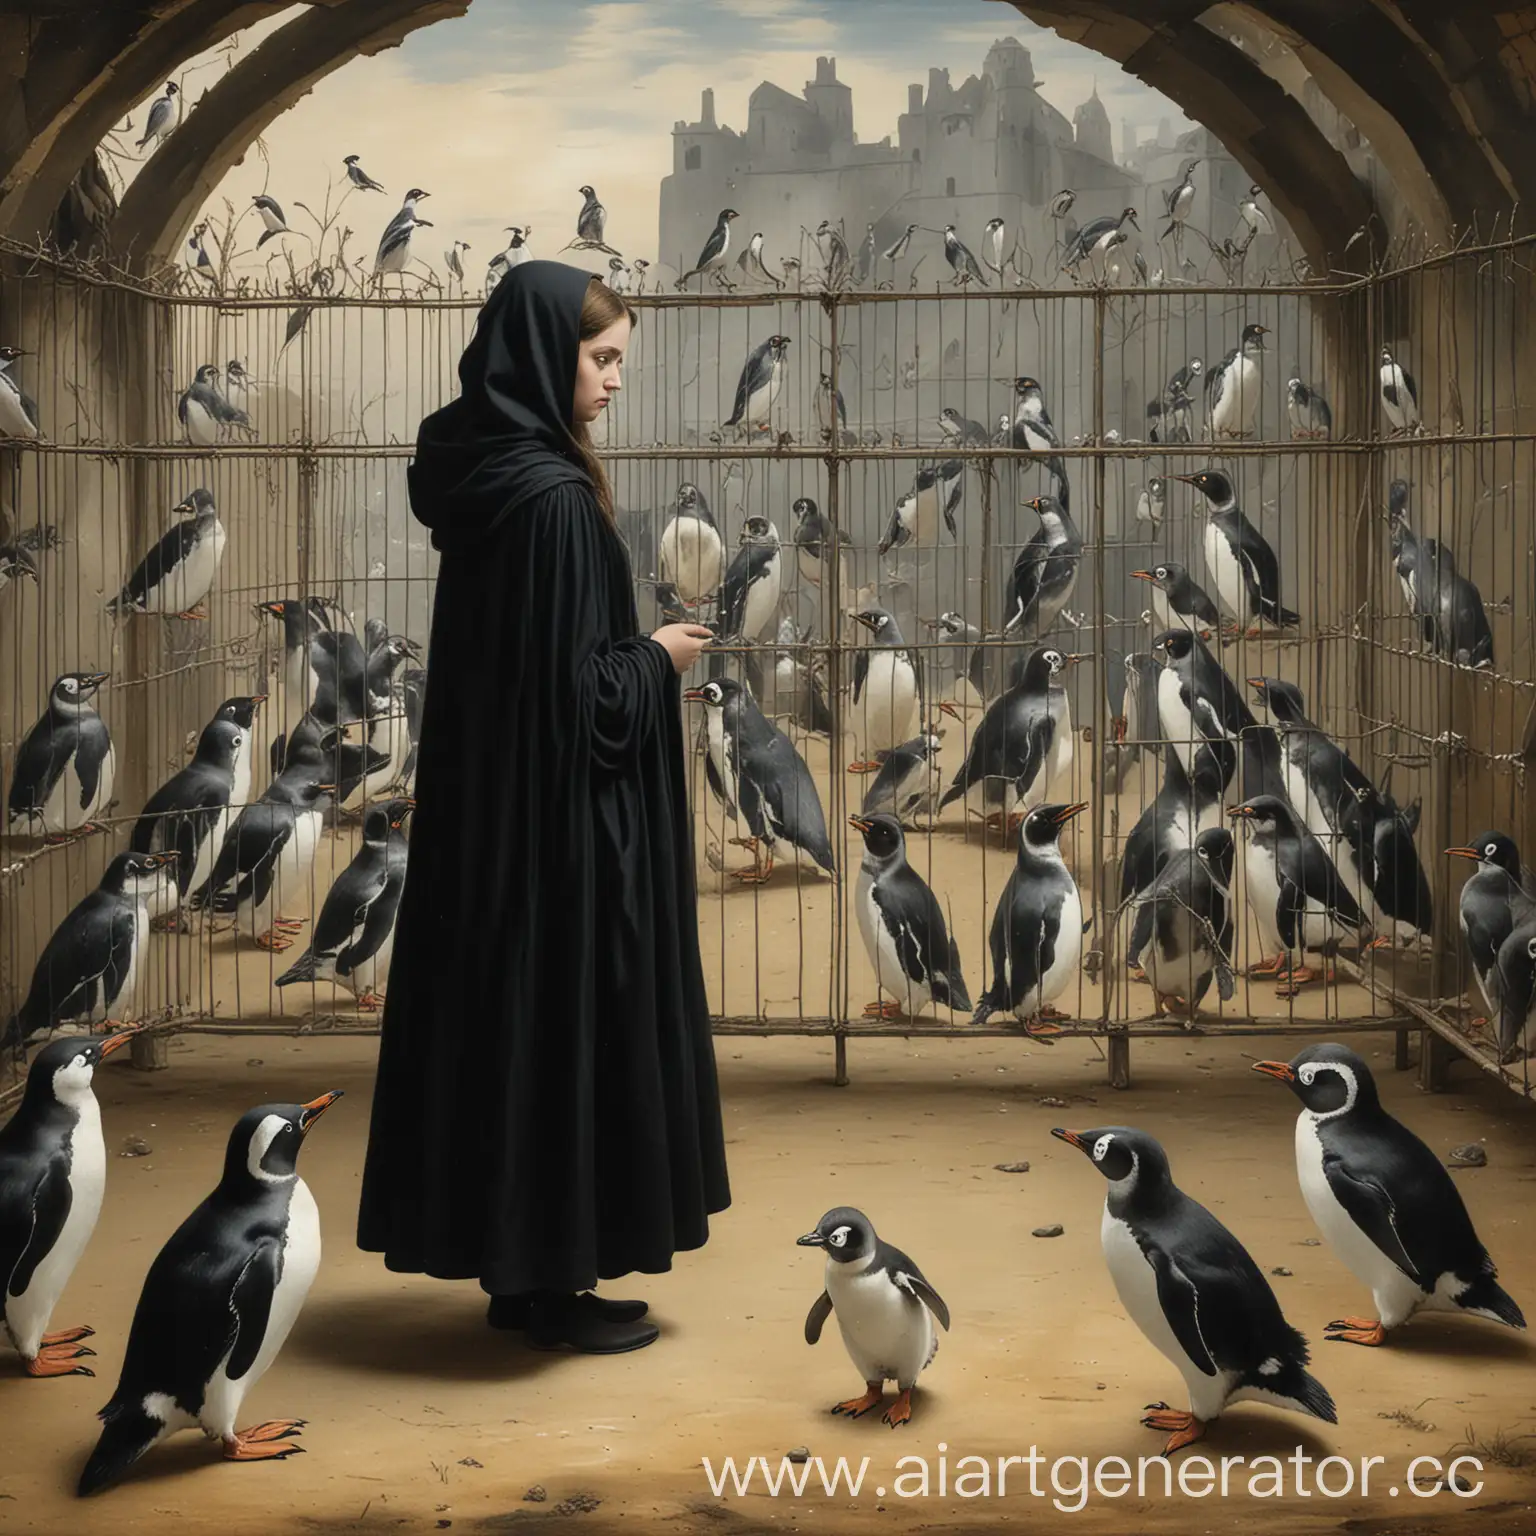 Medieval-Girl-Admiring-Penguins-in-Aviary-Painting